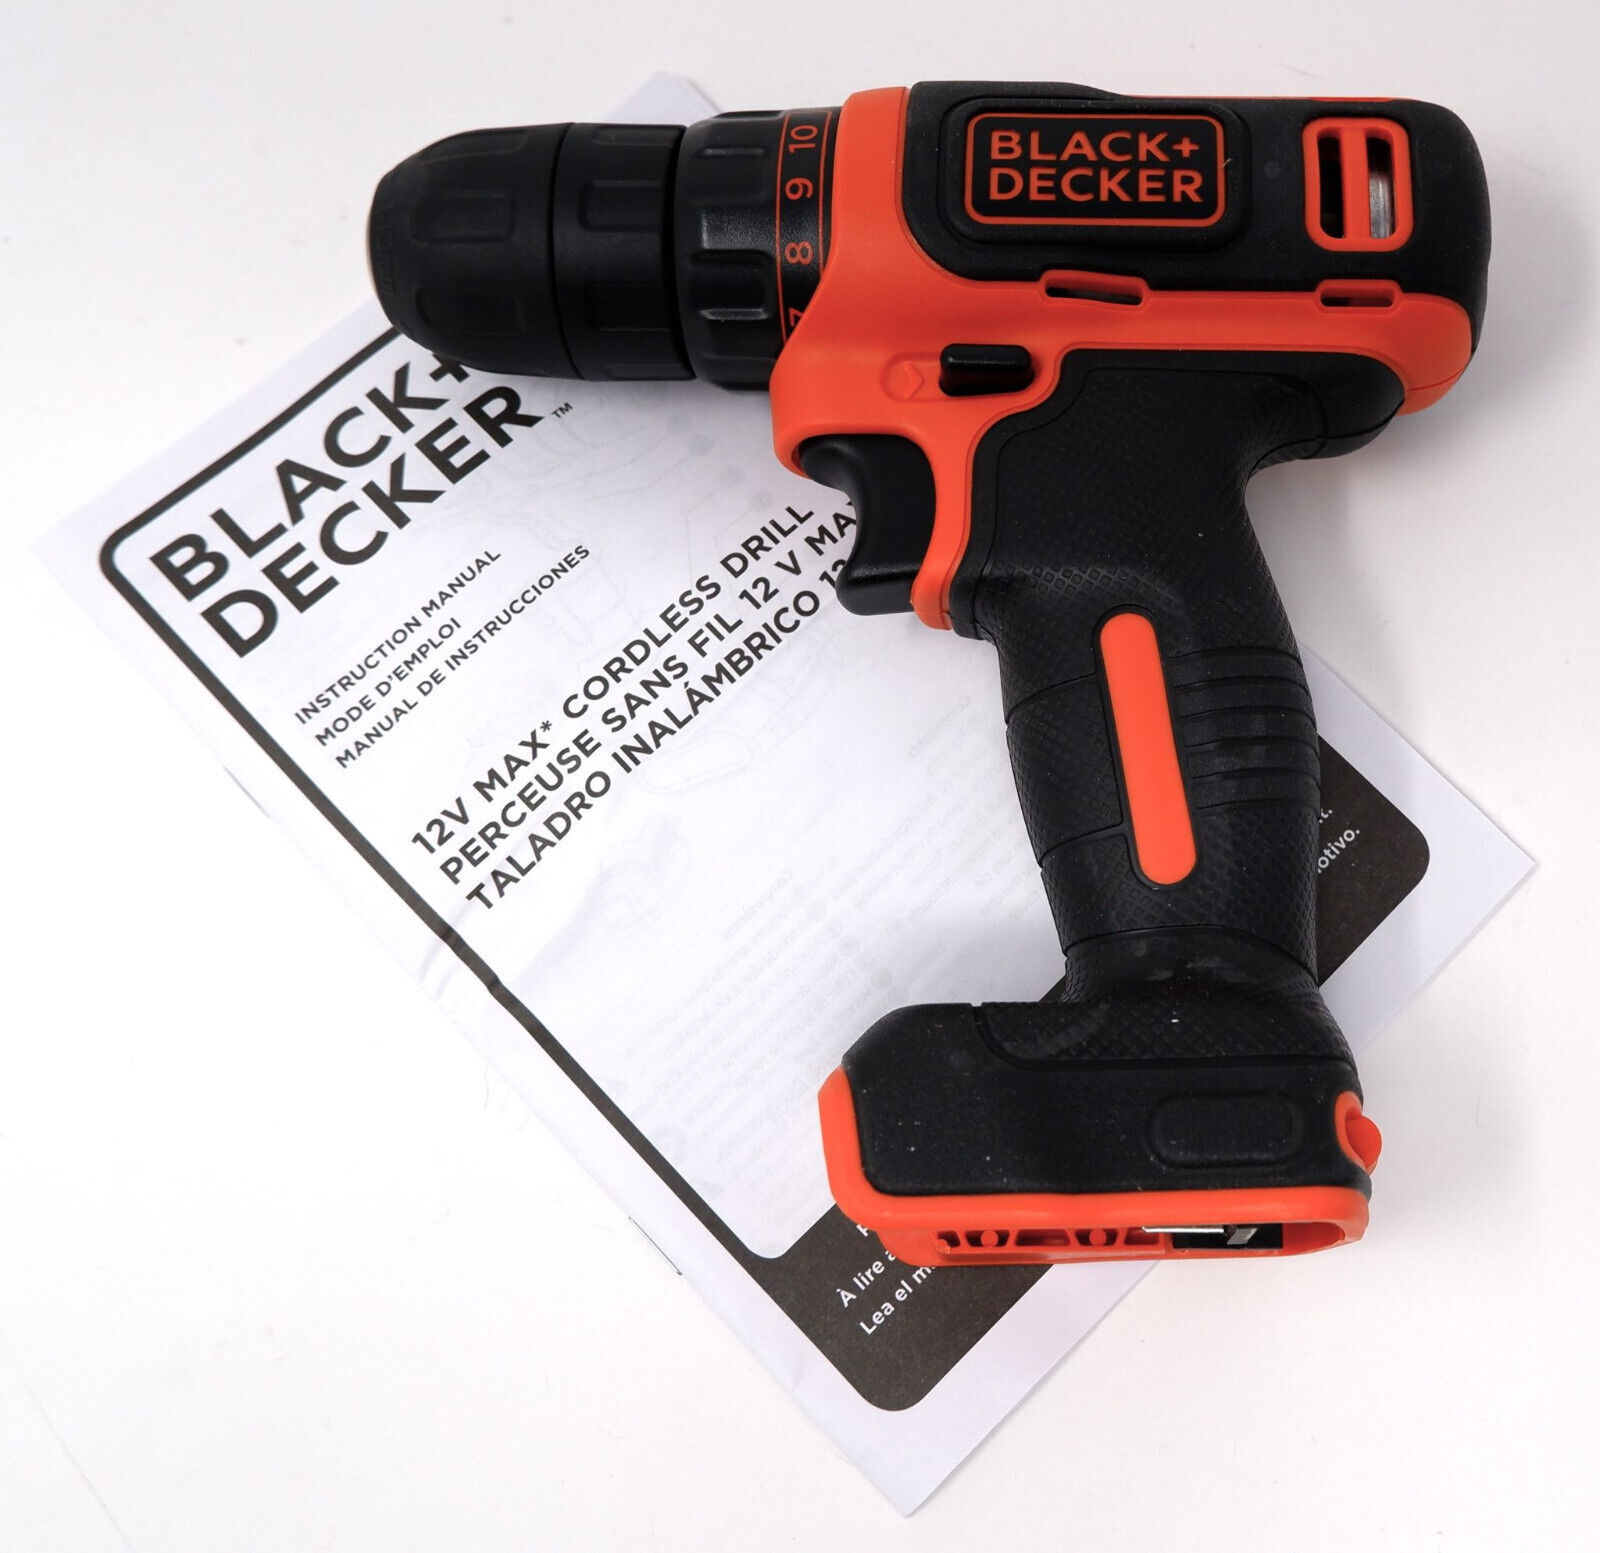 BLACK AND DECKER BDCDD12 3/8" 12V LITHIUM ION CORDLESS DRILL DRIVER (BARE) - NEW - $28.75